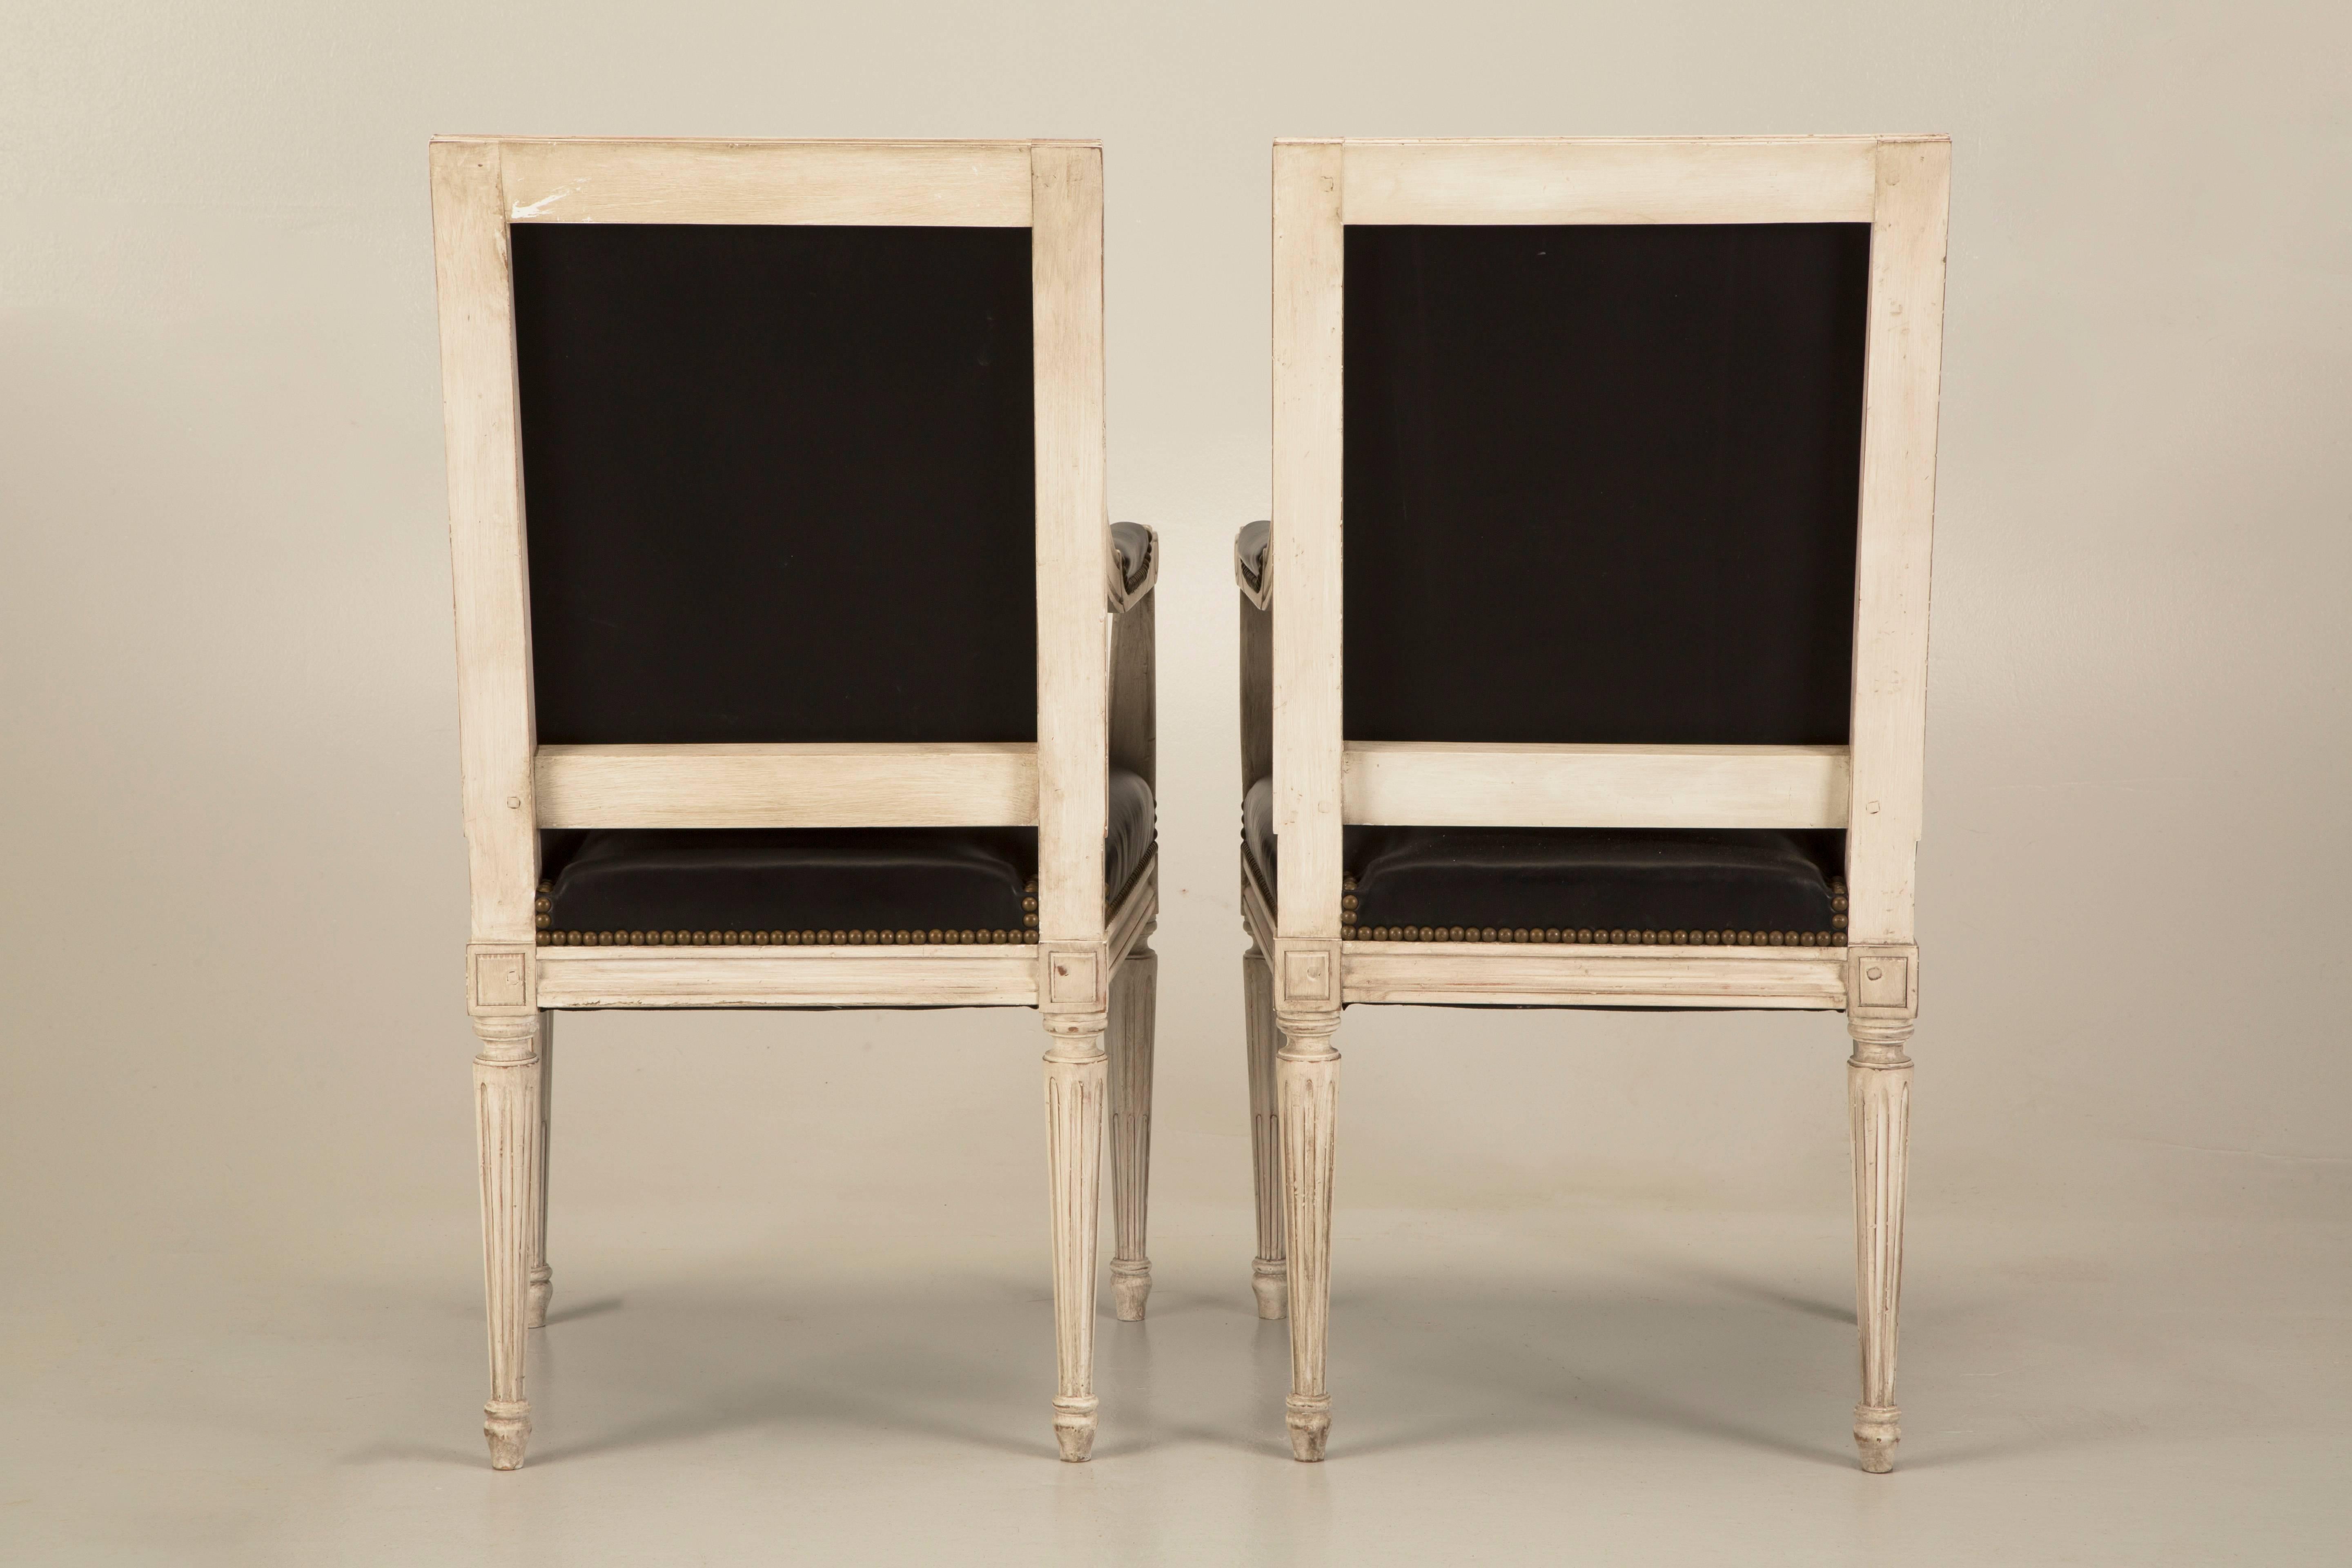 From the Old Plank Collection, comes a Louis XVI style dining chair, made in France, by an elderly gentleman, who has been crafting French dining chairs his entire life. Our French Louis XVI style chairs are available in the flat, as we like to call